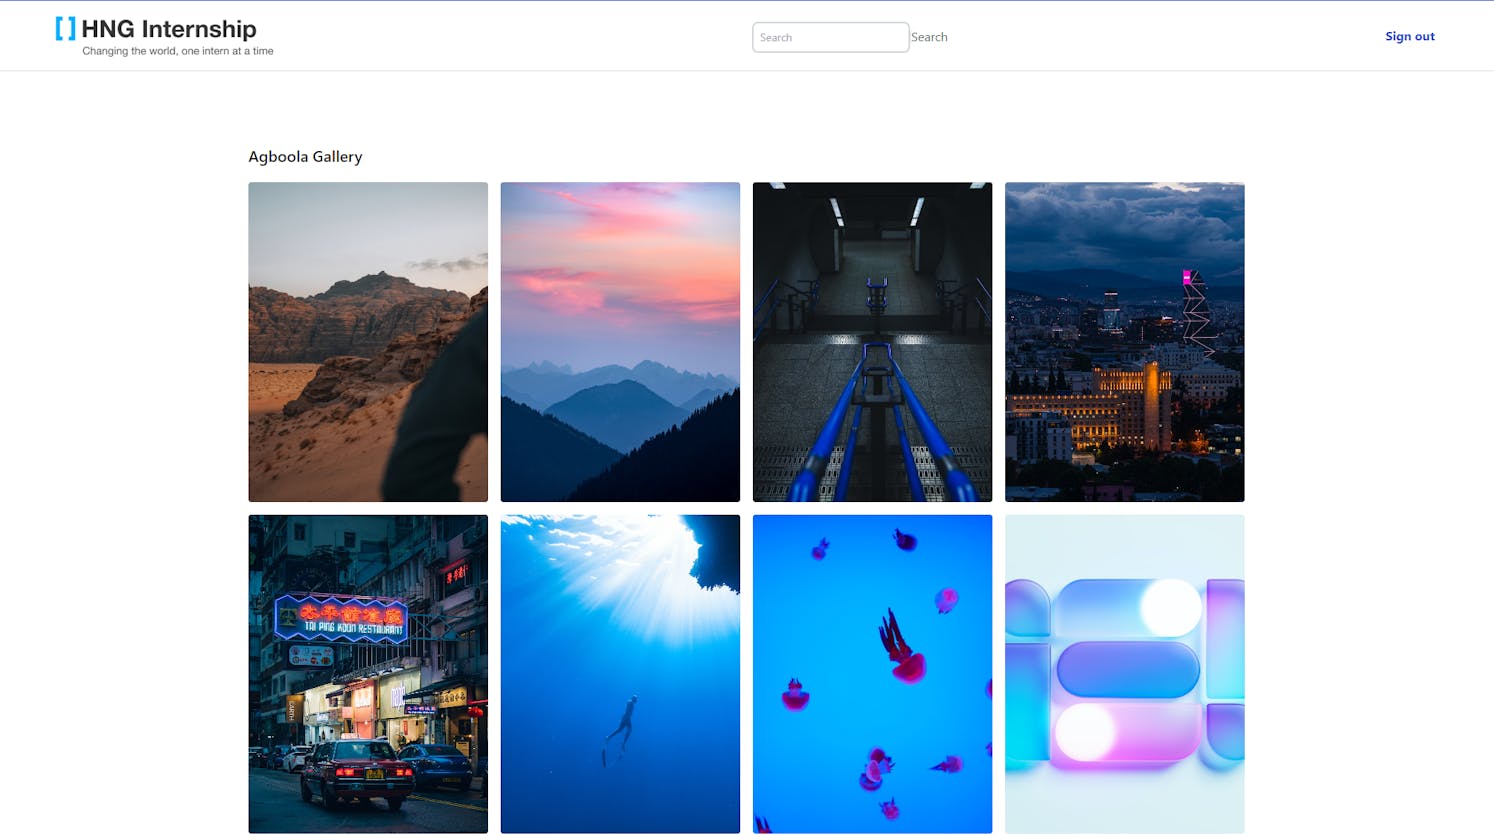 Building a Stunning Gallery App with React, Firebase, Unsplash API, and Tailwind CSS